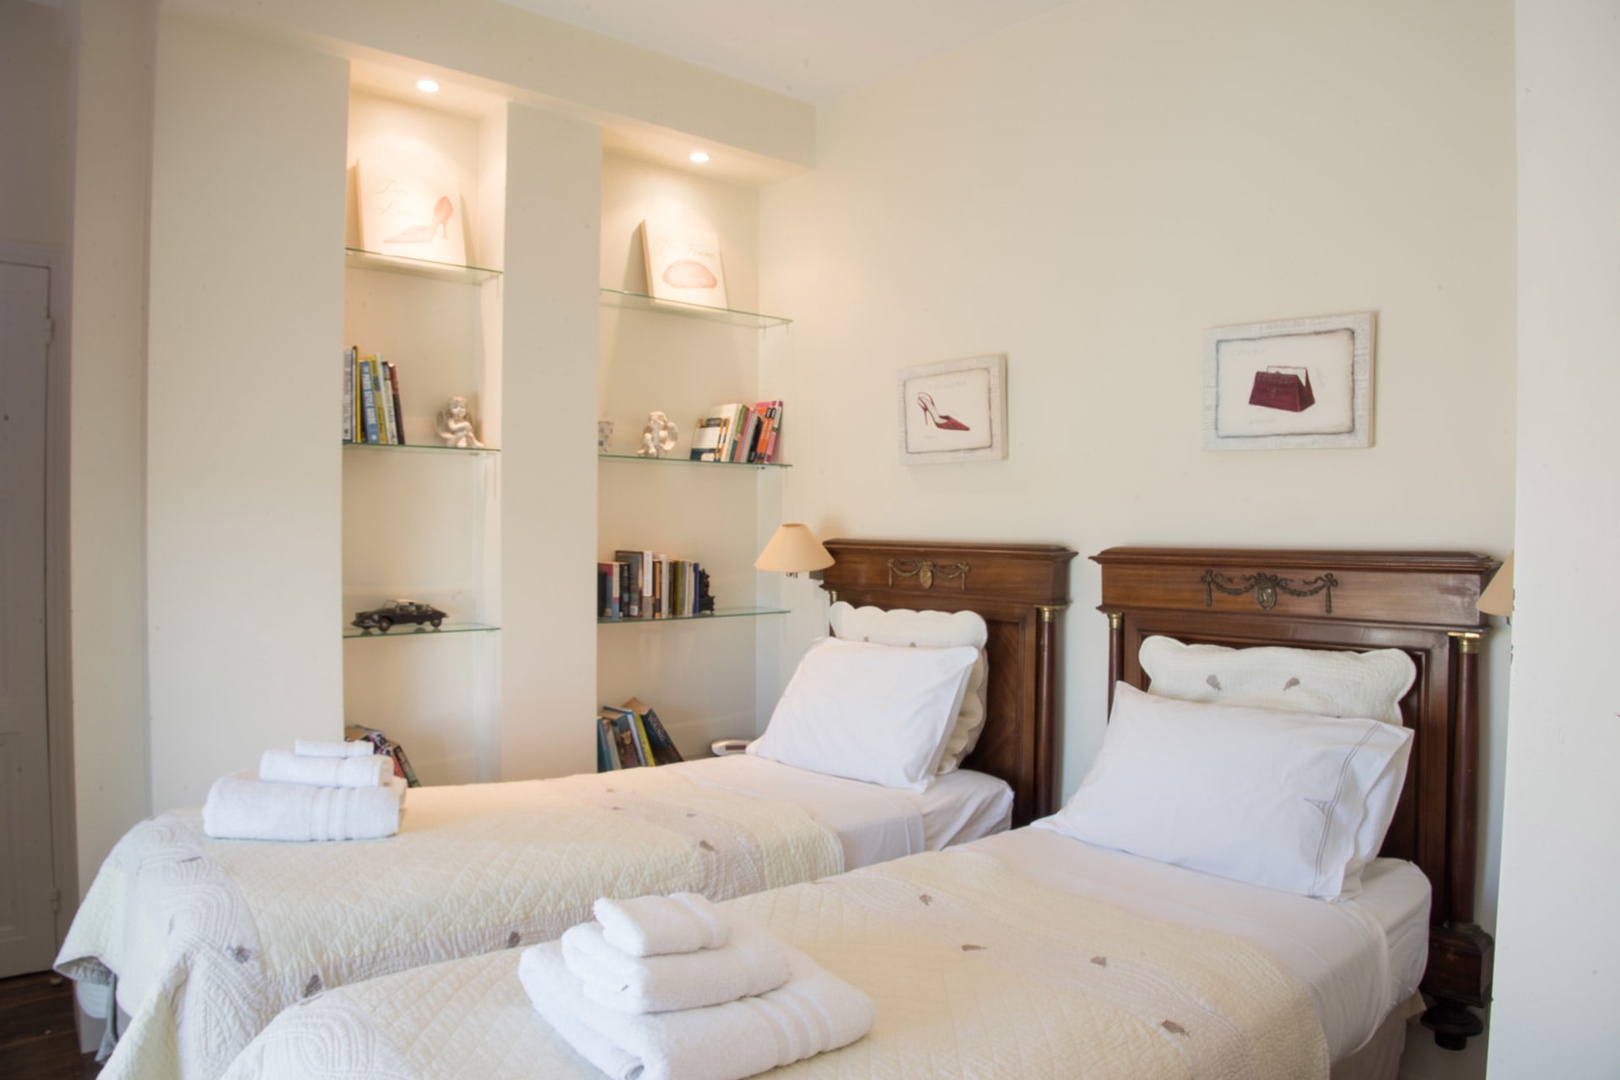 Bedroom 2 is equipped with two comfortable beds and luxurious linens.